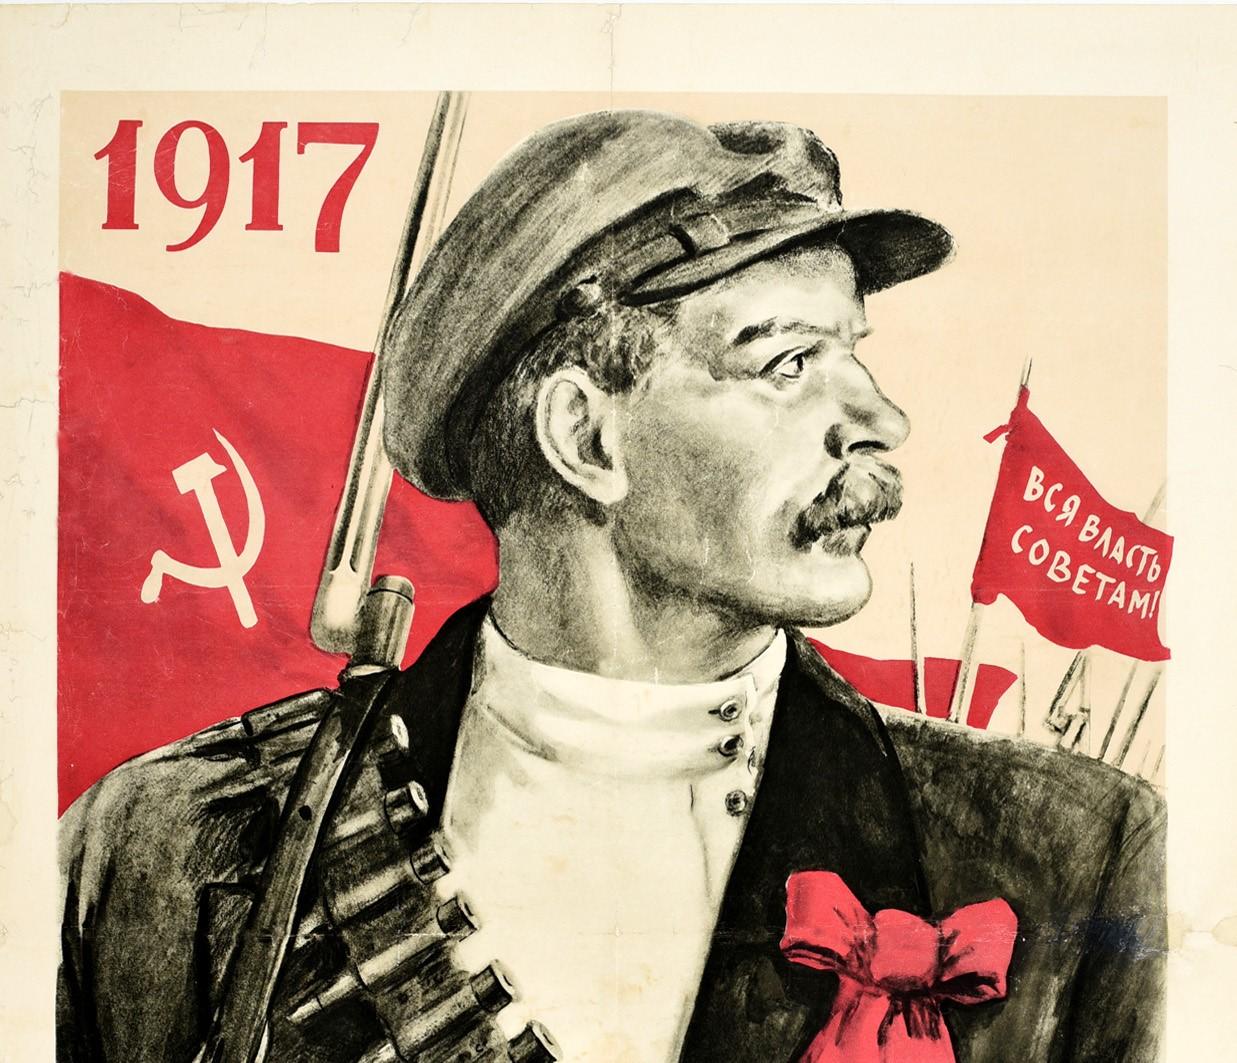 Original vintage Soviet propaganda poster - We Overthrew Centuries of Oppression with a Mighty Hand! Great illustration depicting a man holding a bayonet rifle and wearing a worker's hat with a red bow on his jacket over a traditional shirt and an